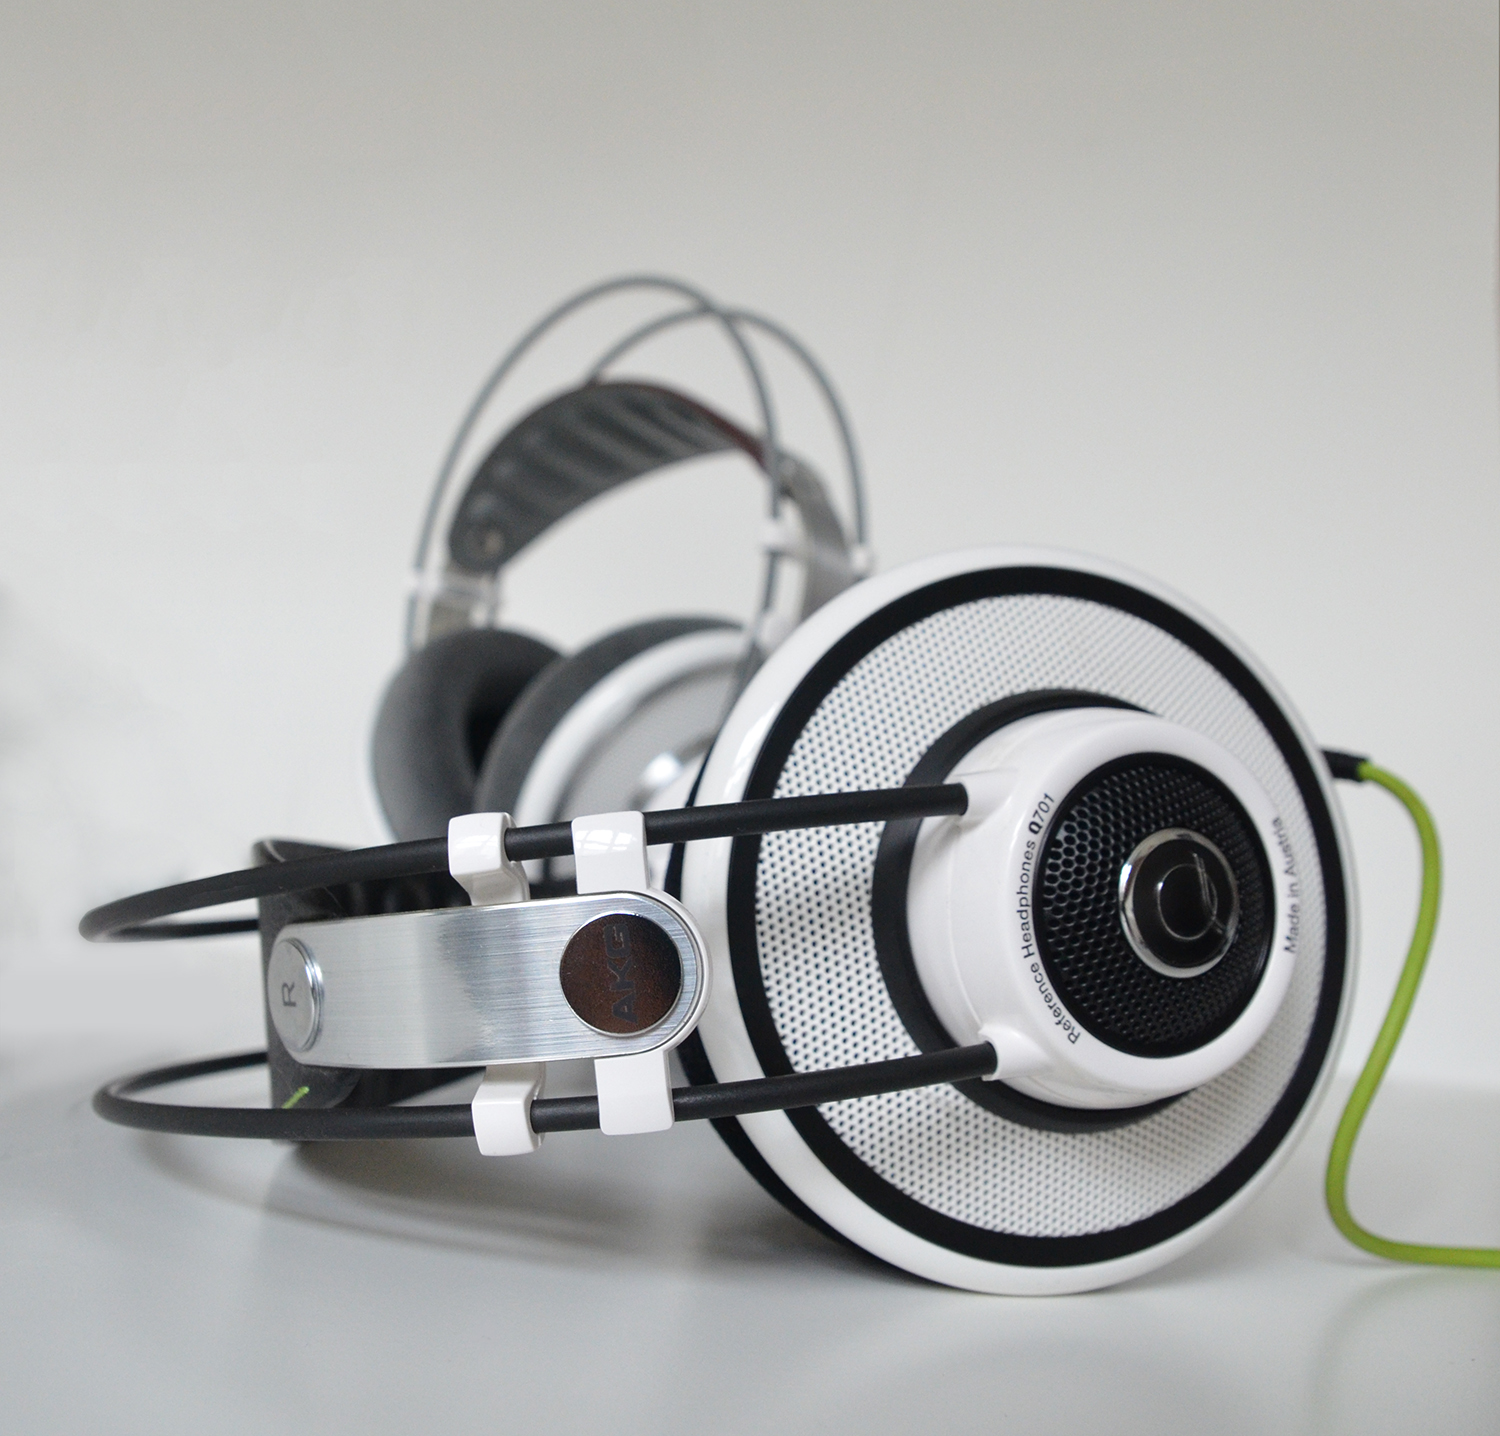 THE BIG AKG K701 AND Q701 REVIEW | The Headphoneer